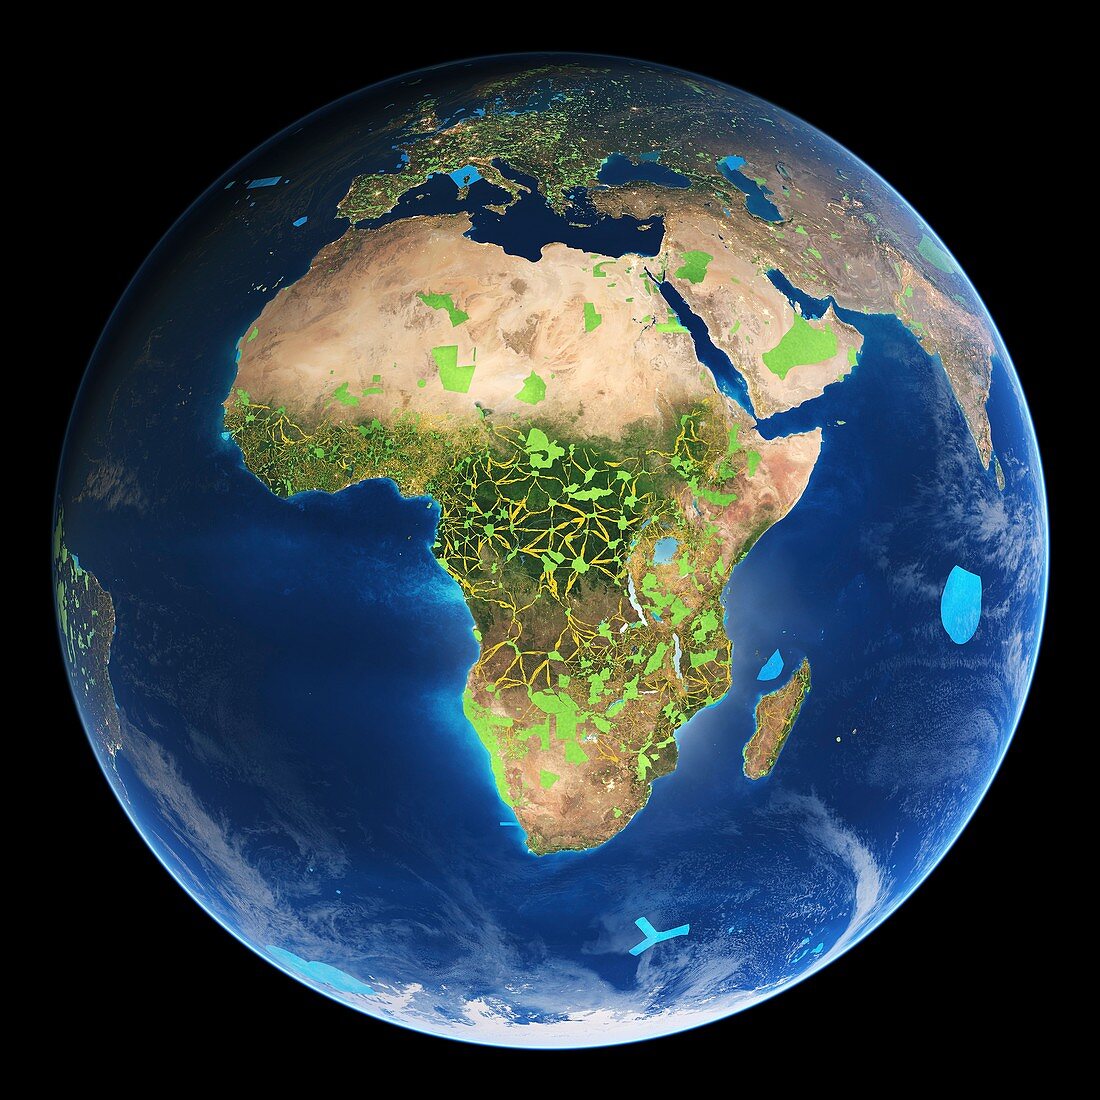 Carbon corridors in central Africa